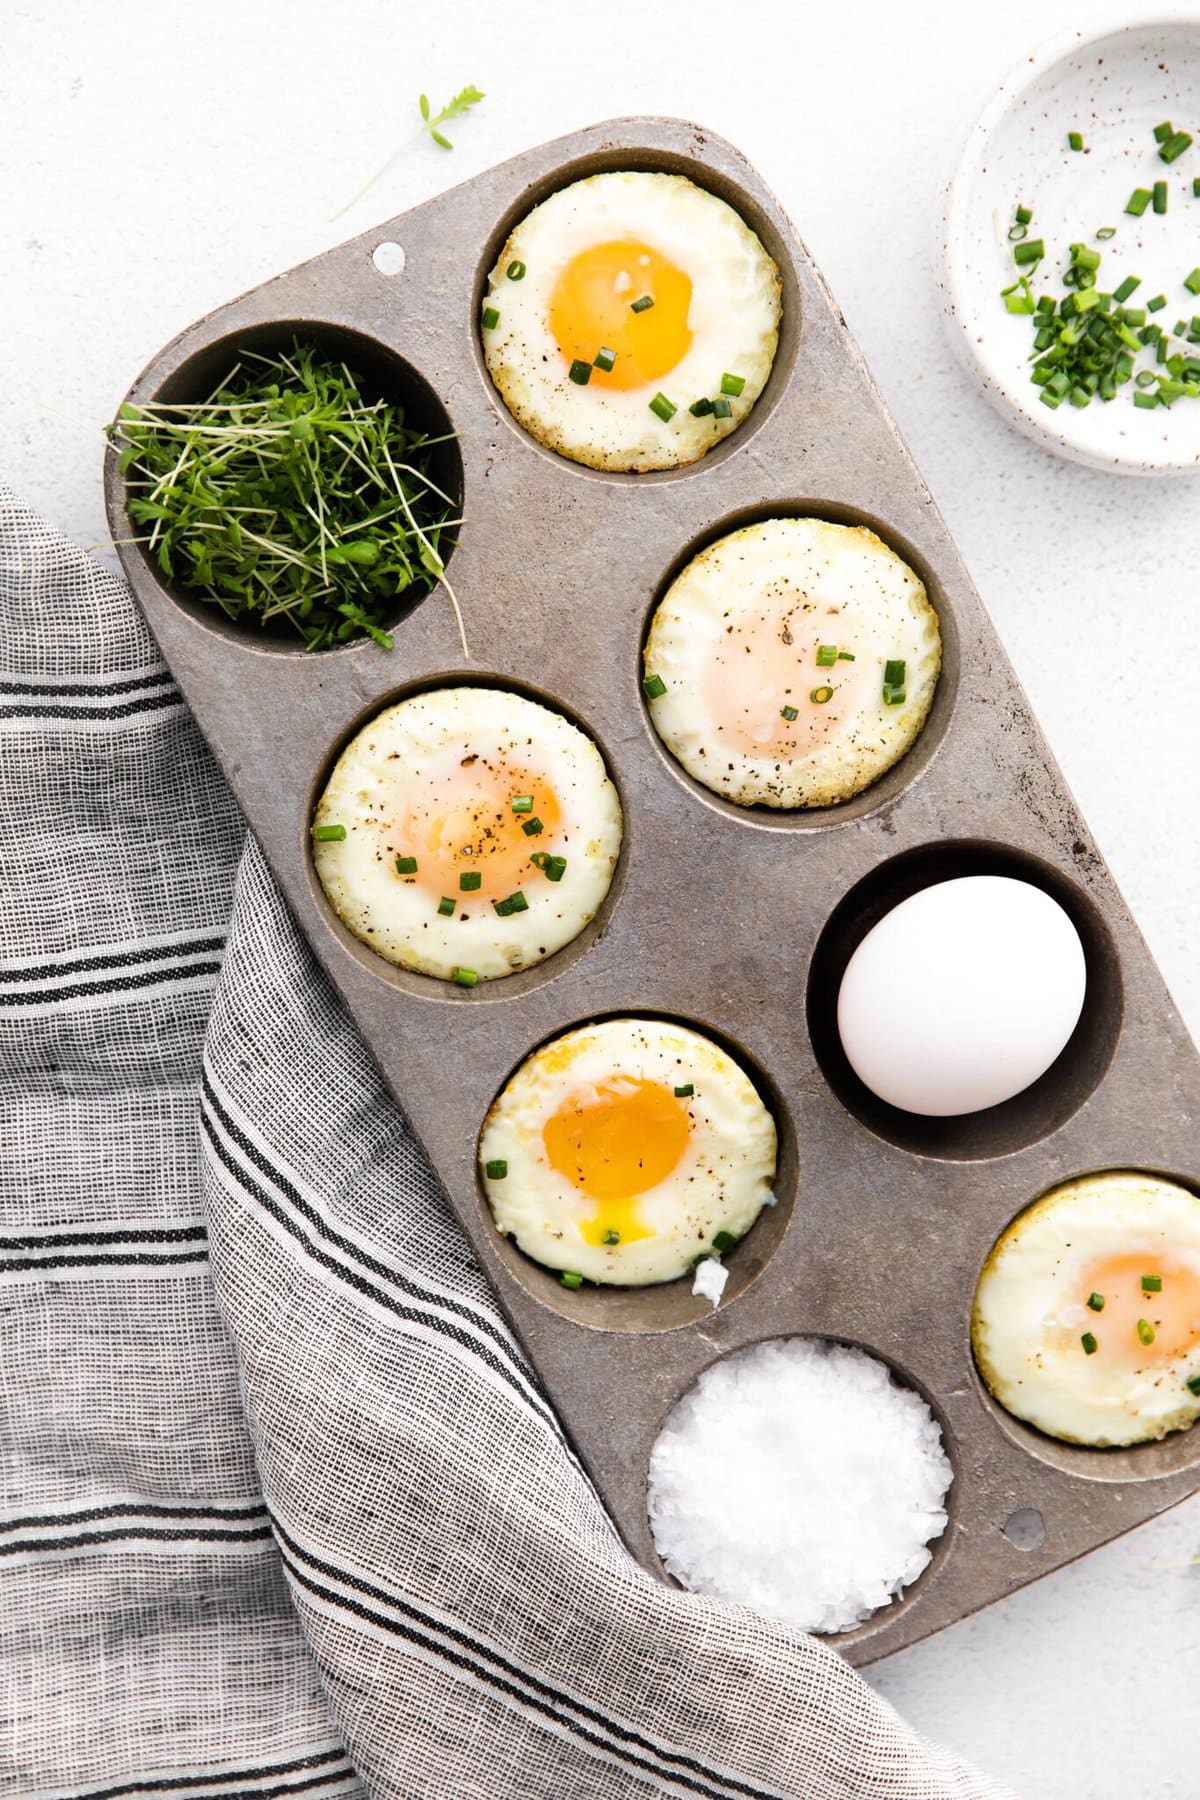 Oven Baked Eggs (ready in 15 minutes!) - Fit Foodie Finds